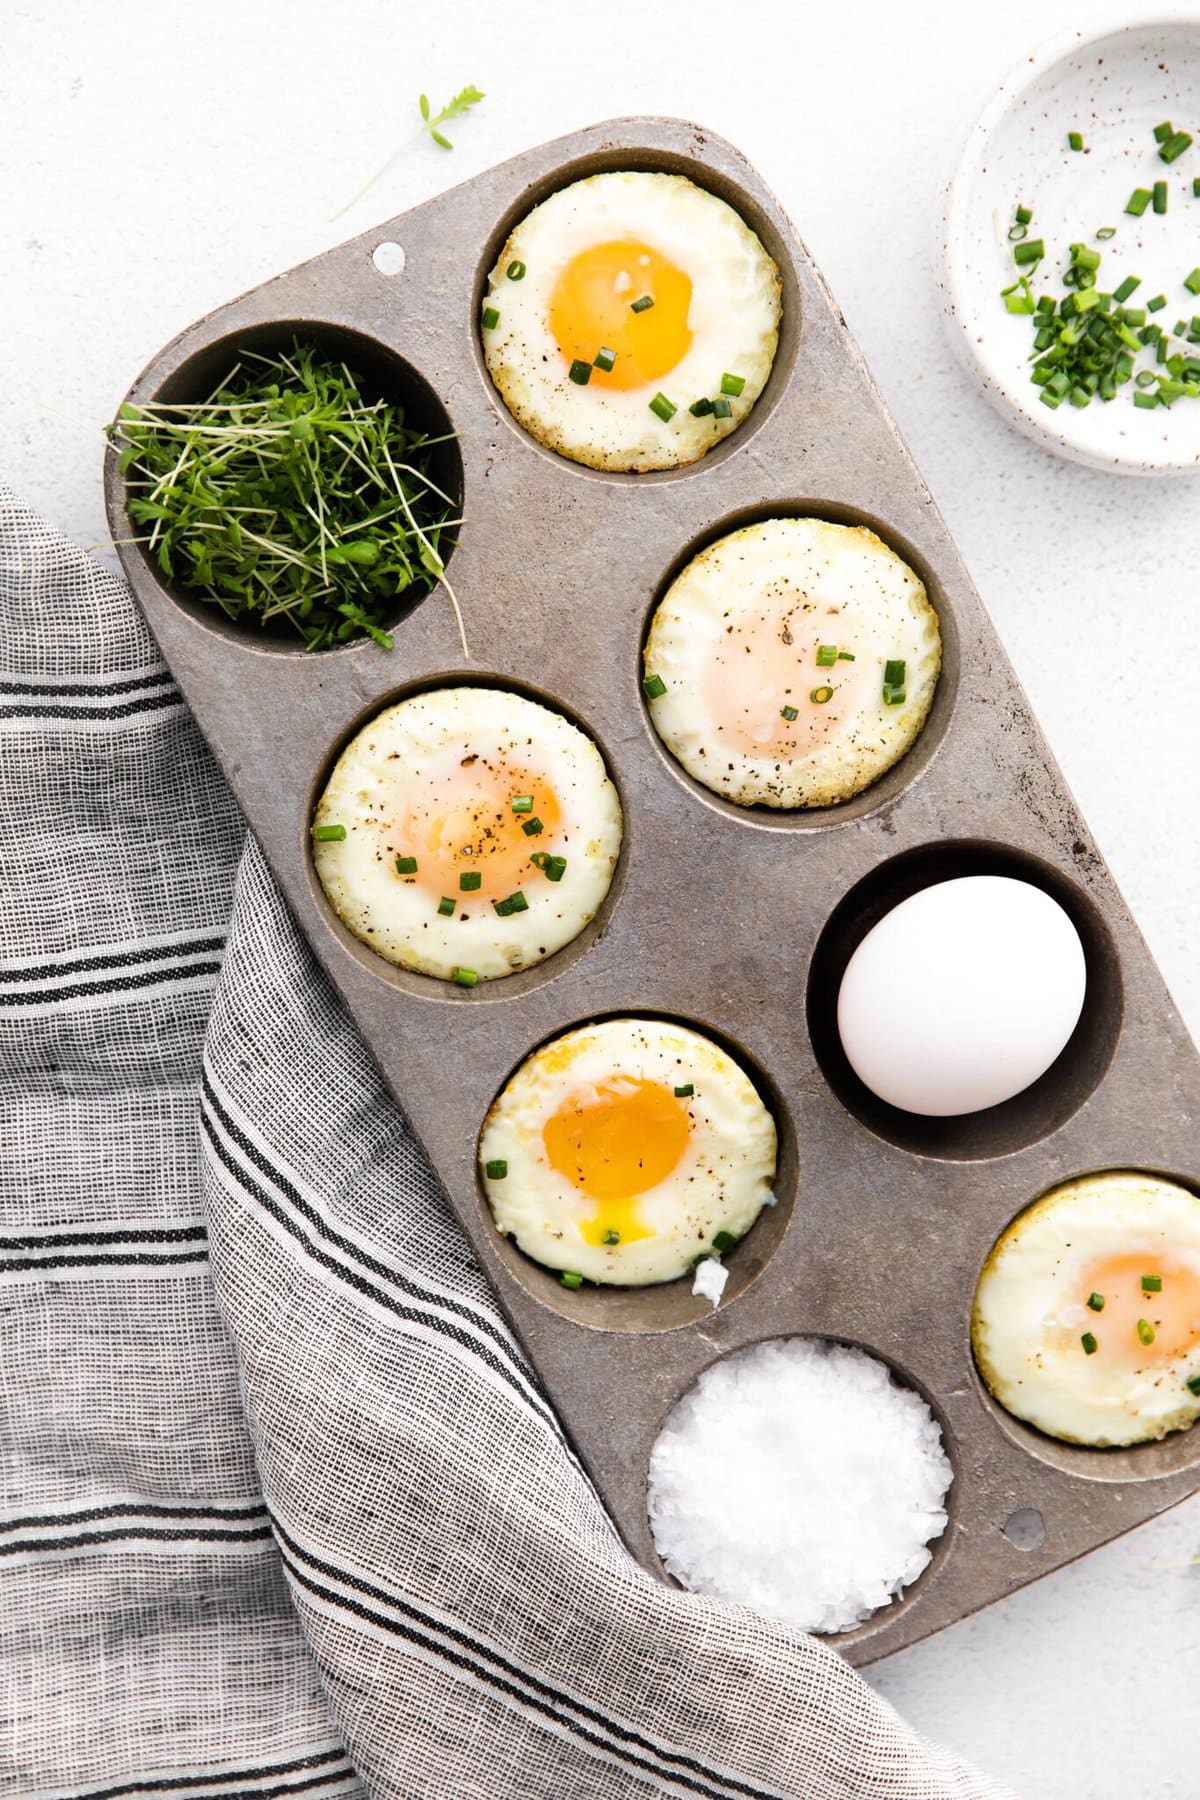 Oven Baked Eggs (ready in 15 minutes!) - Fit Foodie Finds